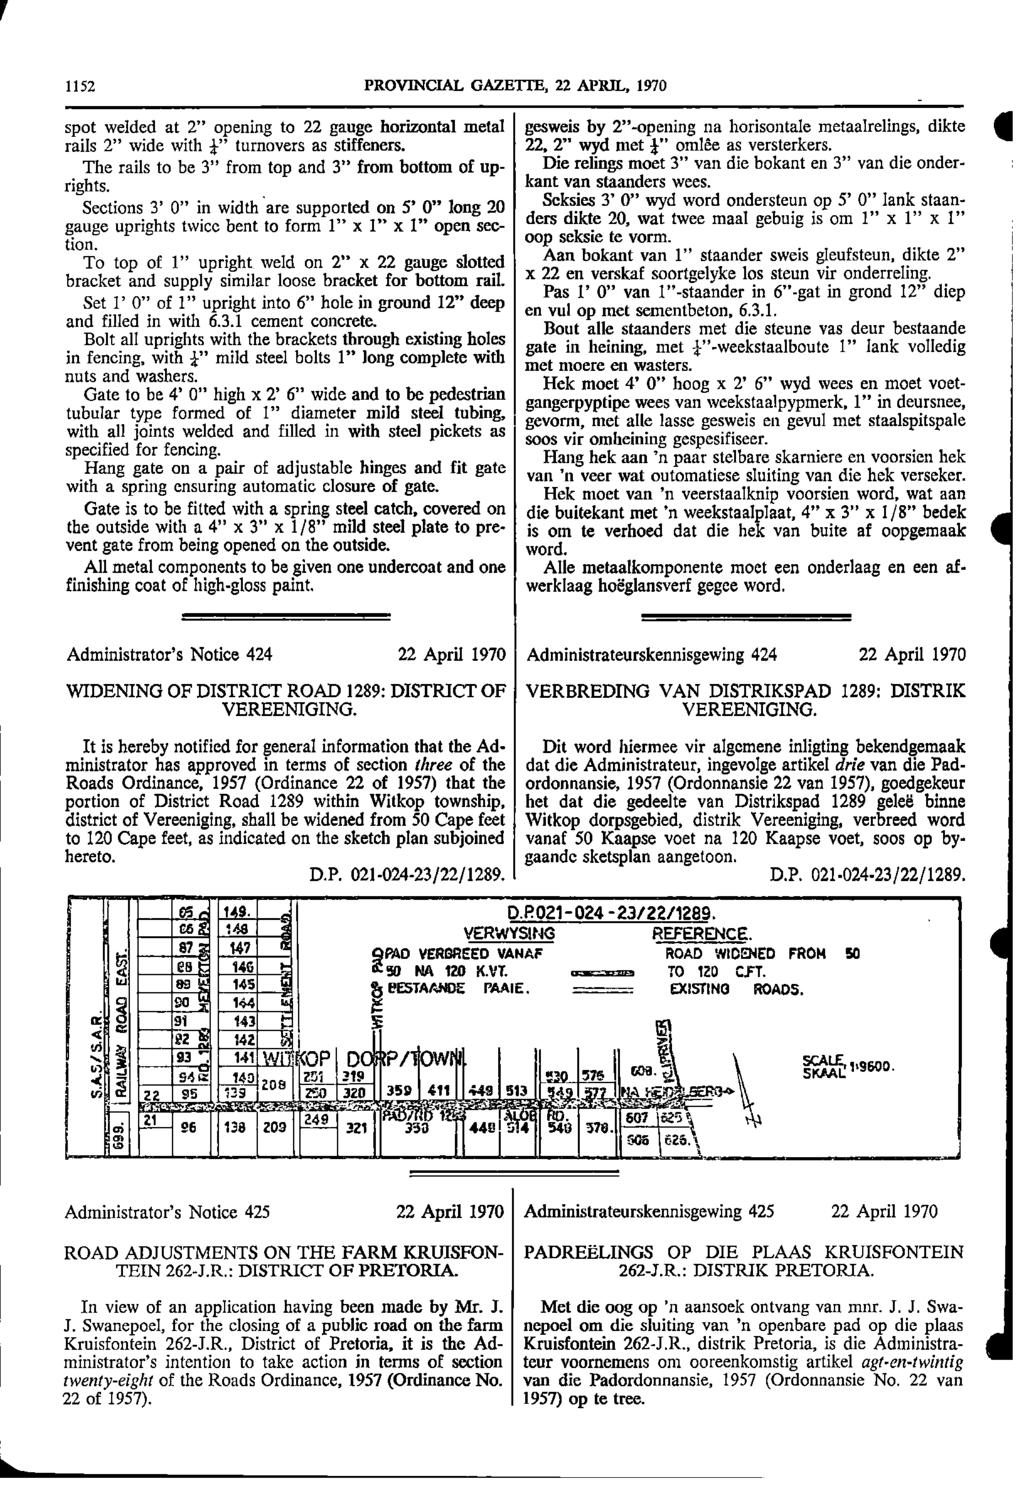 I 1152 PROVINCIAL GAZETTE 22 APRIL 1970 spot welded at 2" opening to 22 gauge horizontal metal gesweis by 2"opening na horisontale metaalrelings dikte a rails 2" wide with i" turnovers as stiffeners